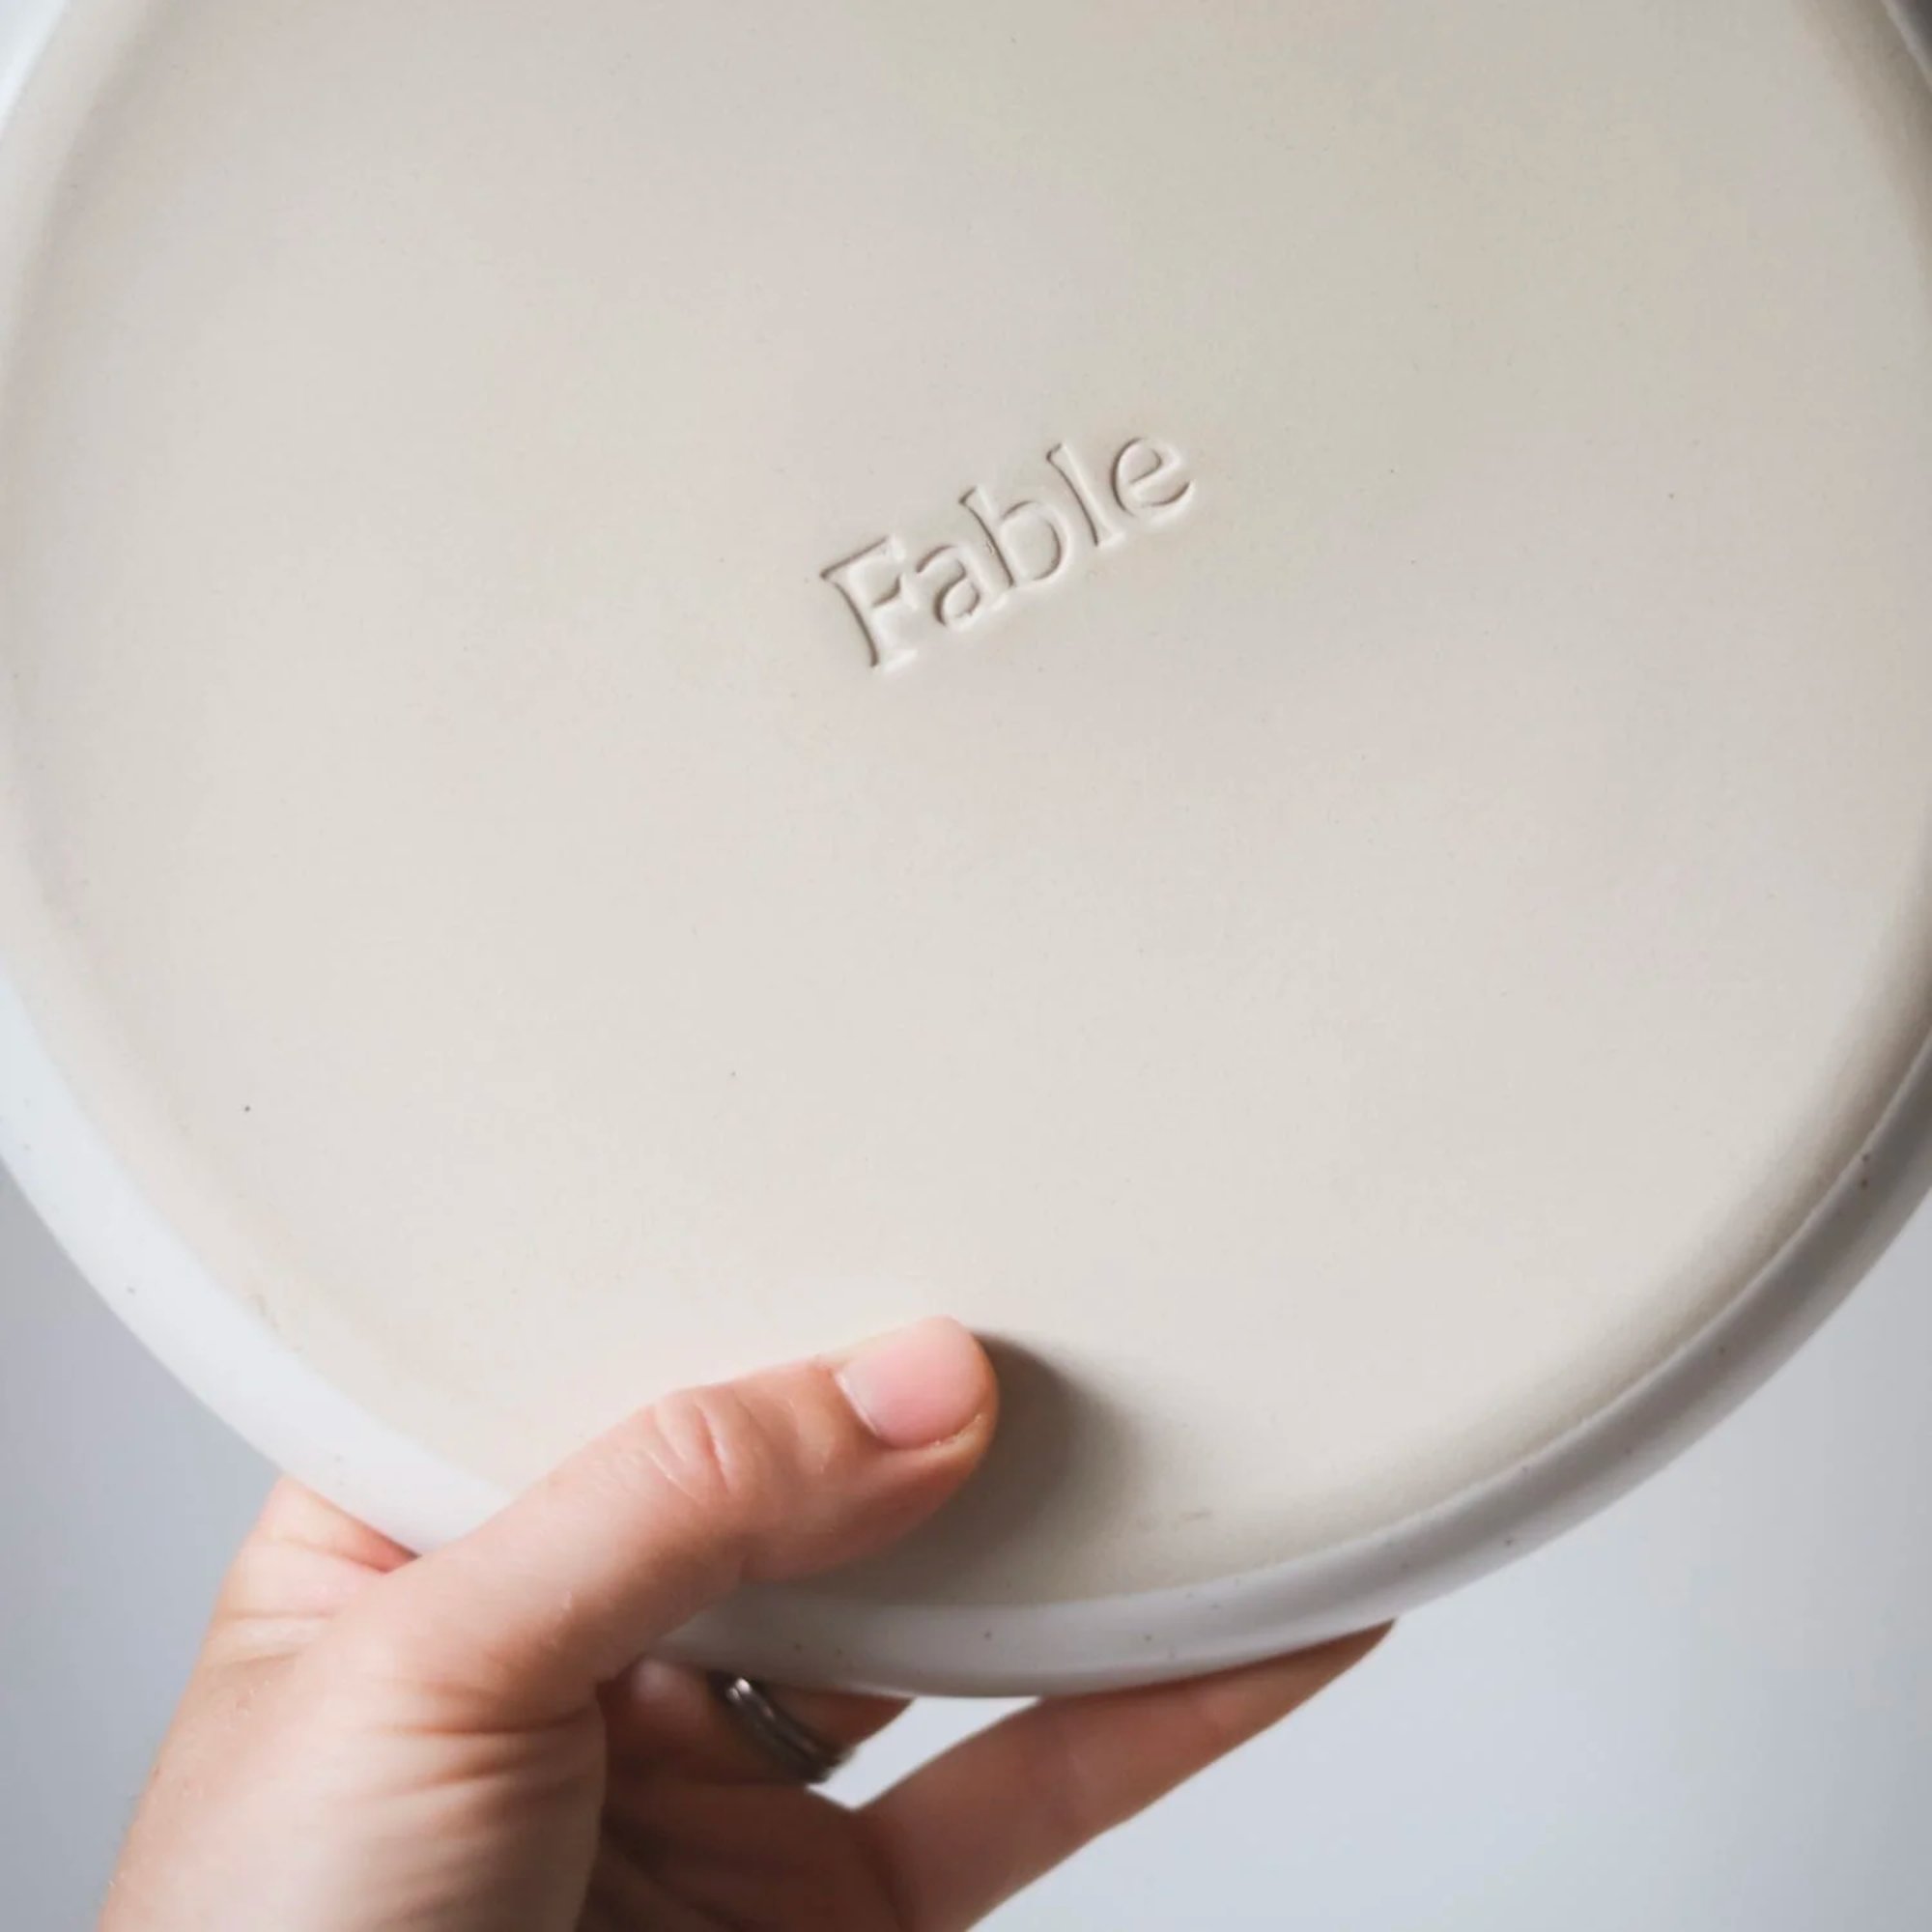 Fable The Low Serving Bowls - Speckled White